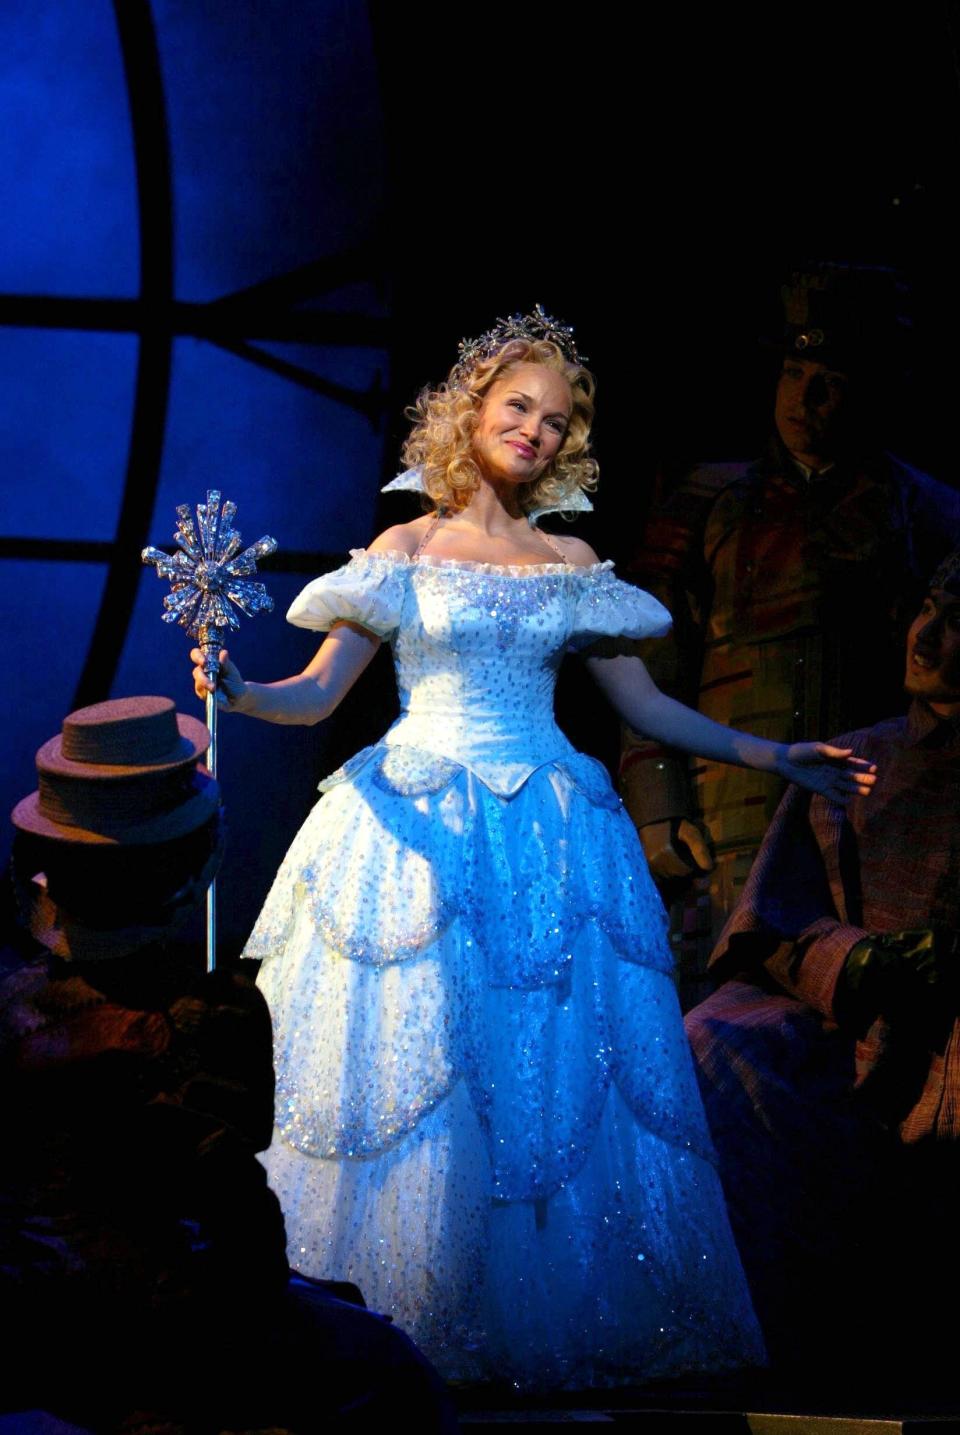 Kristin Chenoweth in a scene from the theatrical stage production of Wicked, a new musical by Stephen Schwartz and Winnie Holzman based on the novel by Gregory Maguire. Directed by Joe Mantello with musical staging by Wayne Cilento. --- DATE TAKEN: rec. 10/03  By Joan Marcus  NoCredit        HO      - handout ORG XMIT: ZX8005